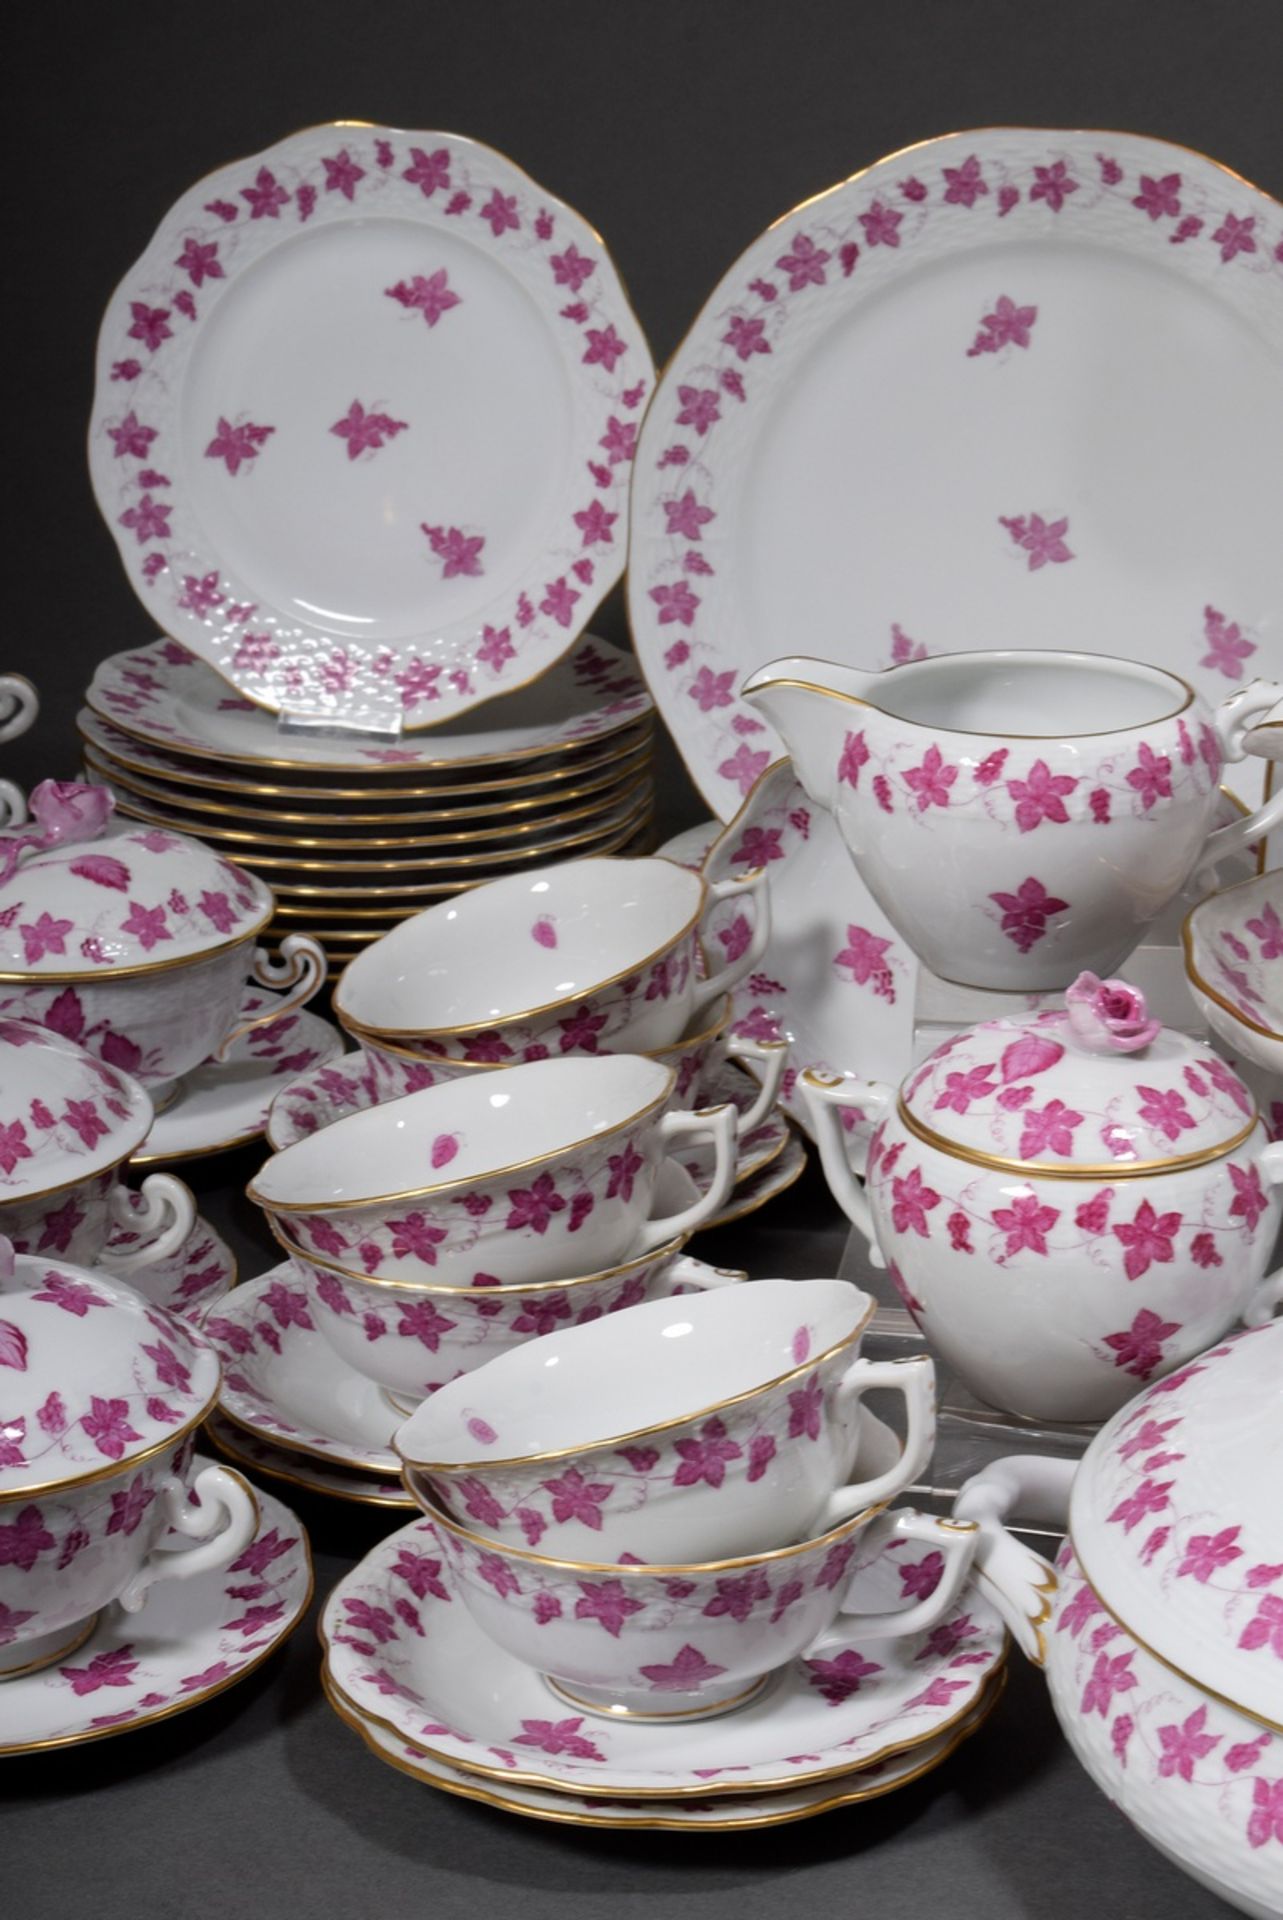 65 pieces Herend coffee and dinner service "Guirland de Raisins" with purple painting and gold rim, - Image 3 of 7